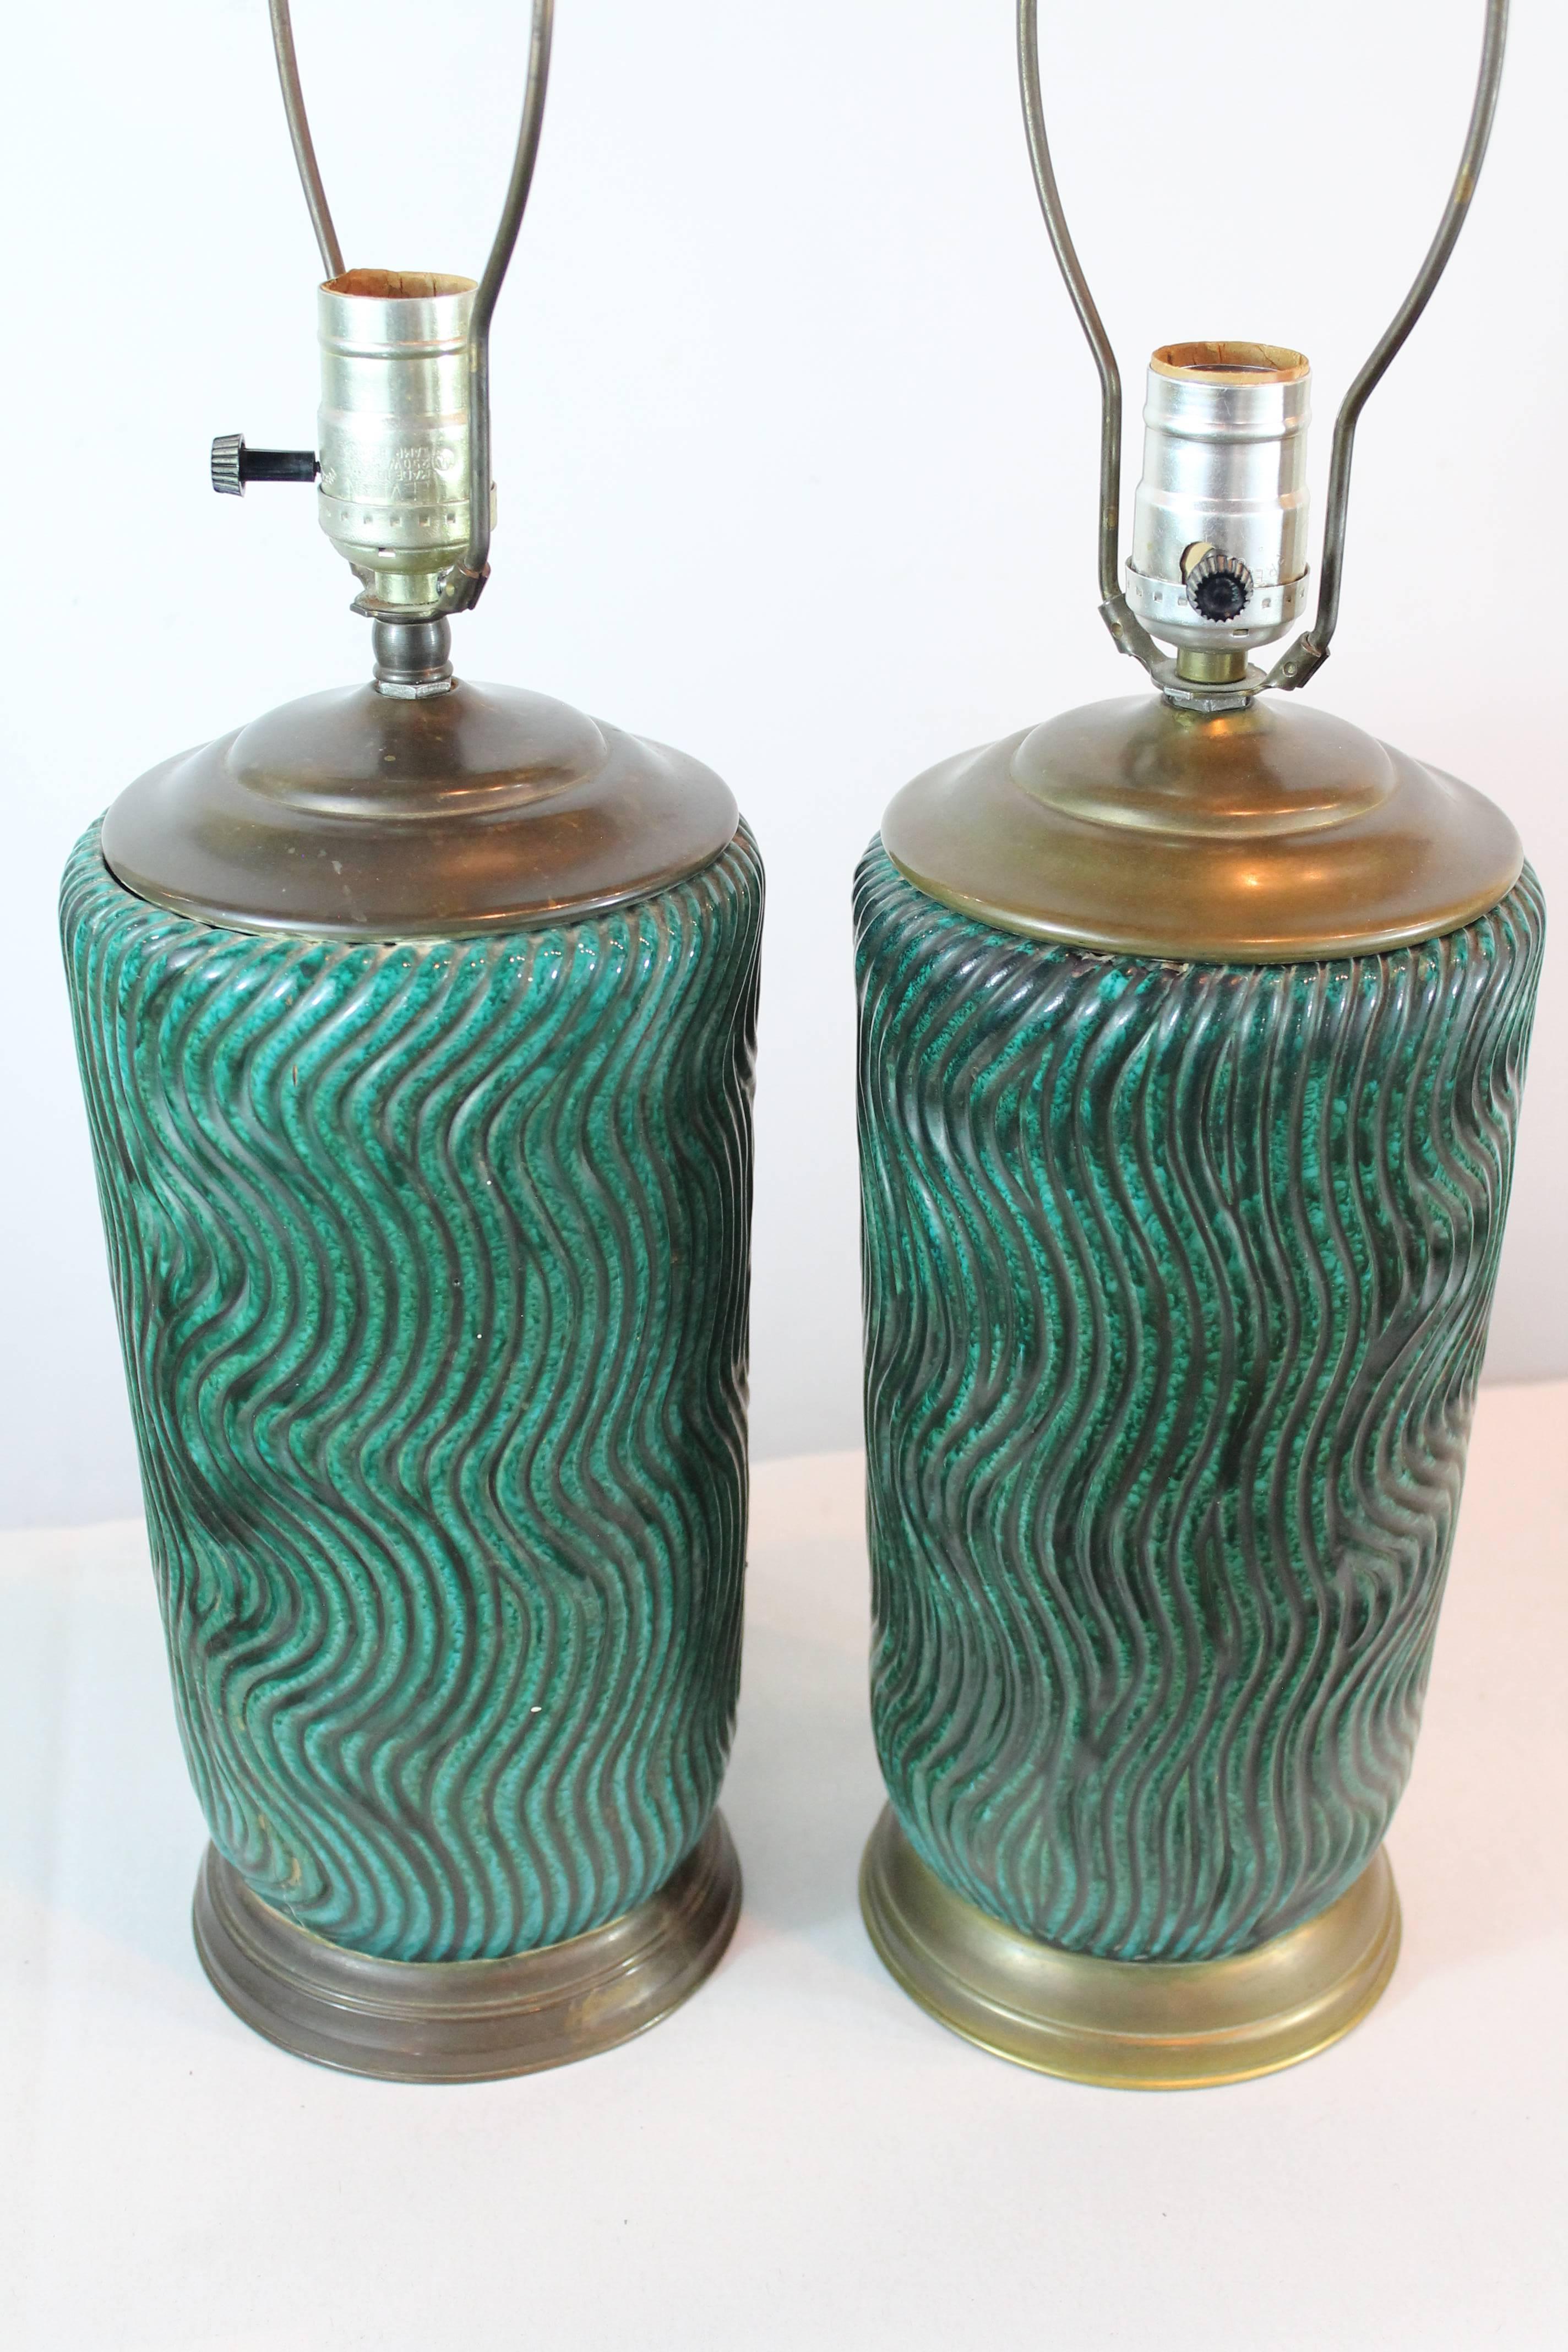 Remarkable flowing wave designed ceramic pair of lamps featuring a wonderful green variegated glaze.
The brass bases are slightly different in design and the patina is darker slightly on one of the lamps.
No finials or shades included.